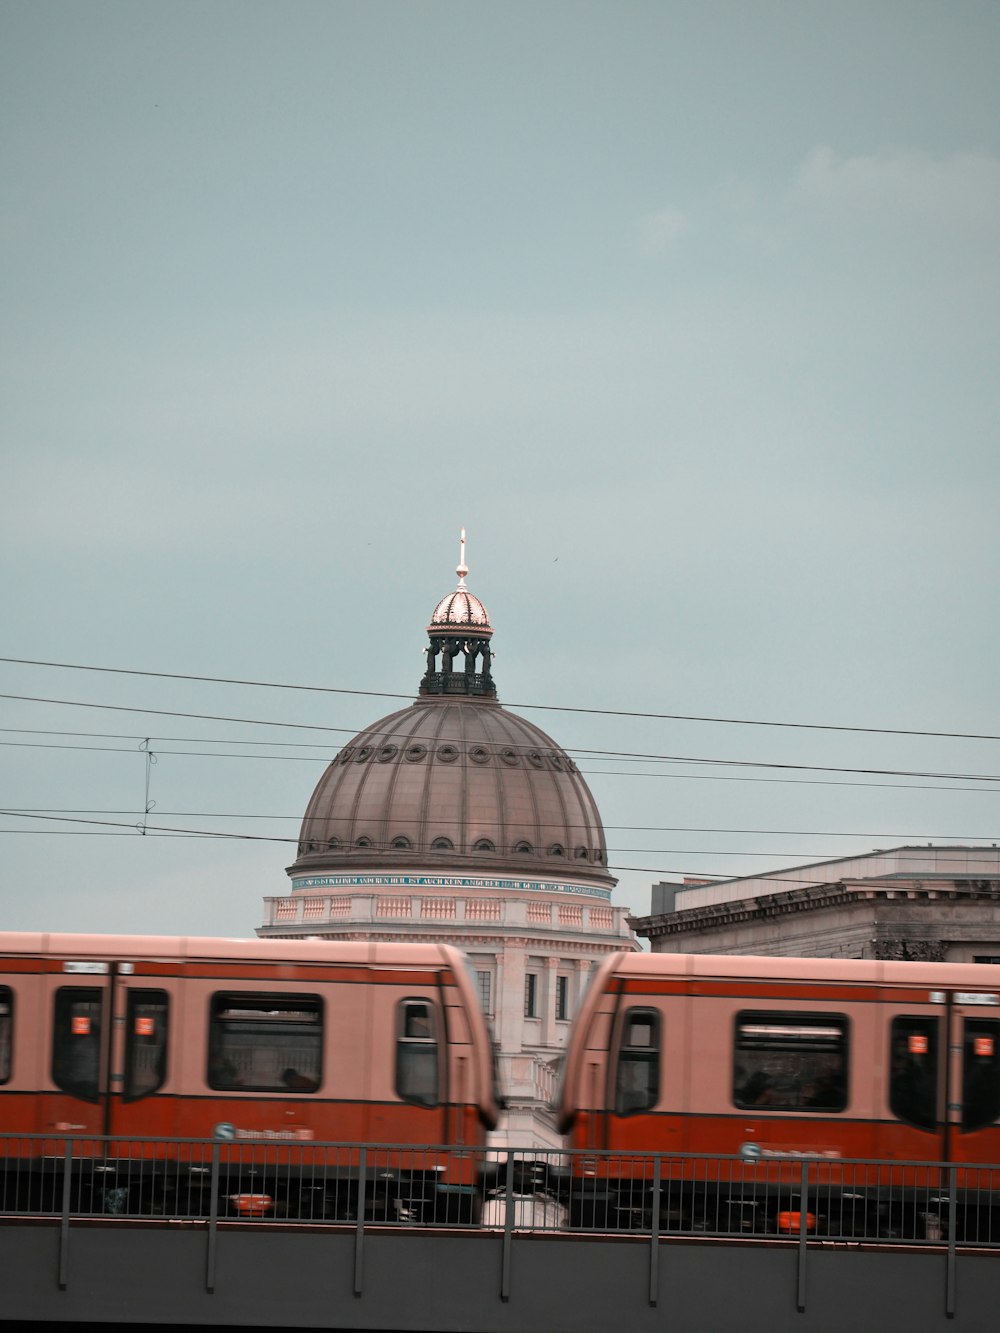 a red train traveling past a tall white building